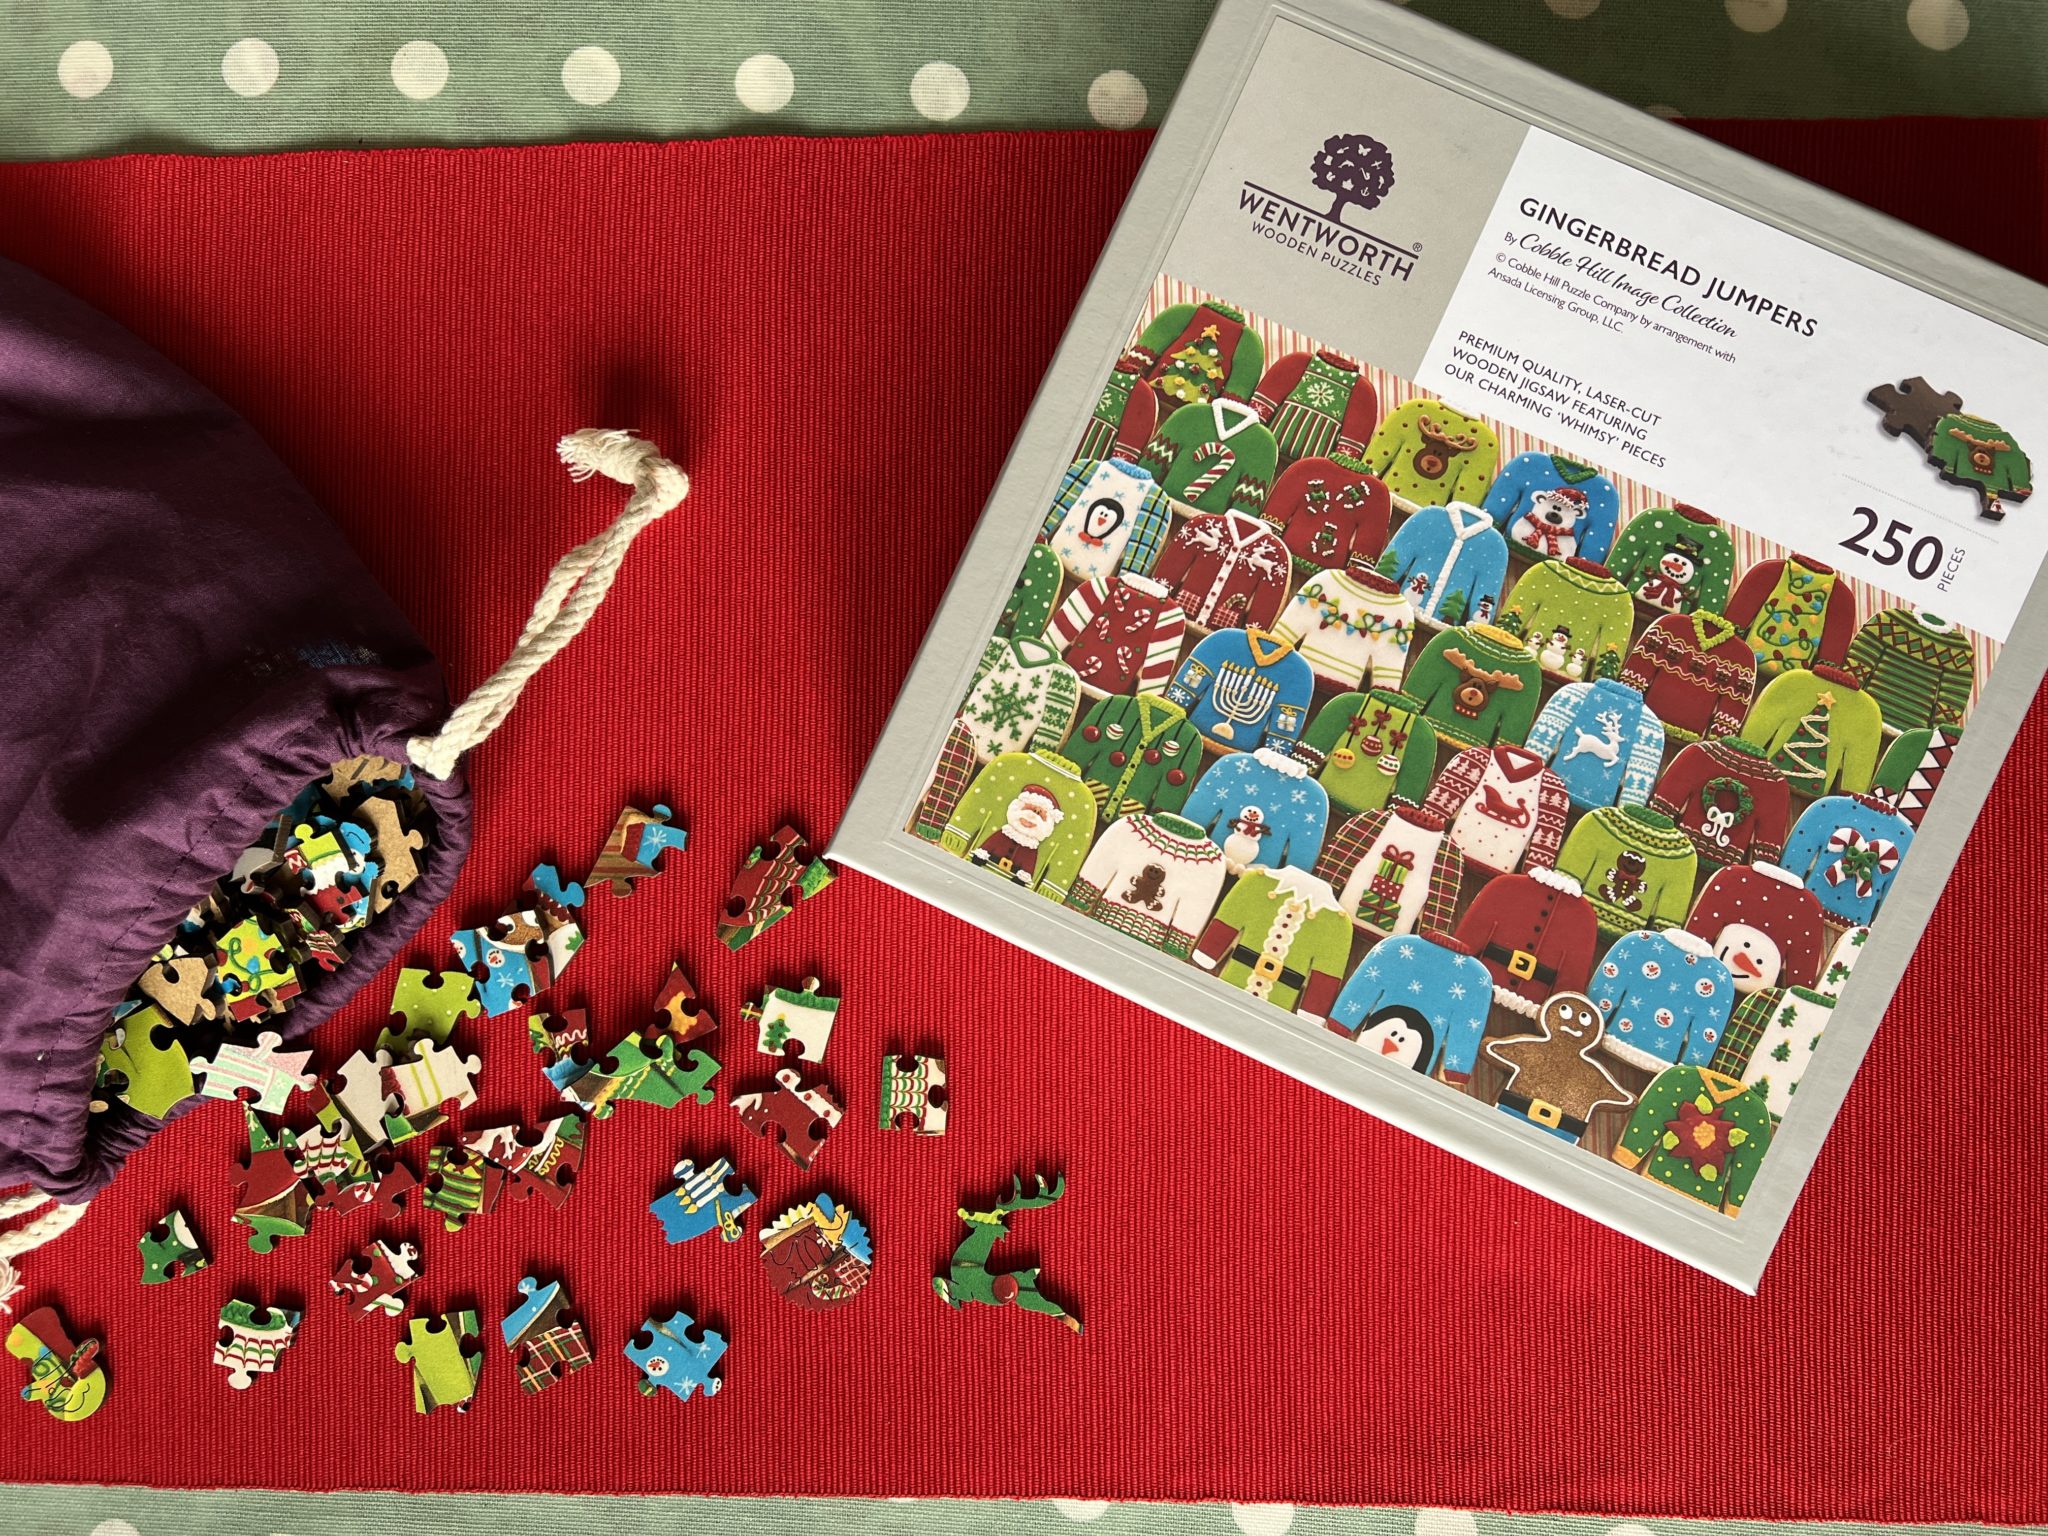 Wentworth Puzzles’ Gingerbread Jumpers Jigsaw Puzzle